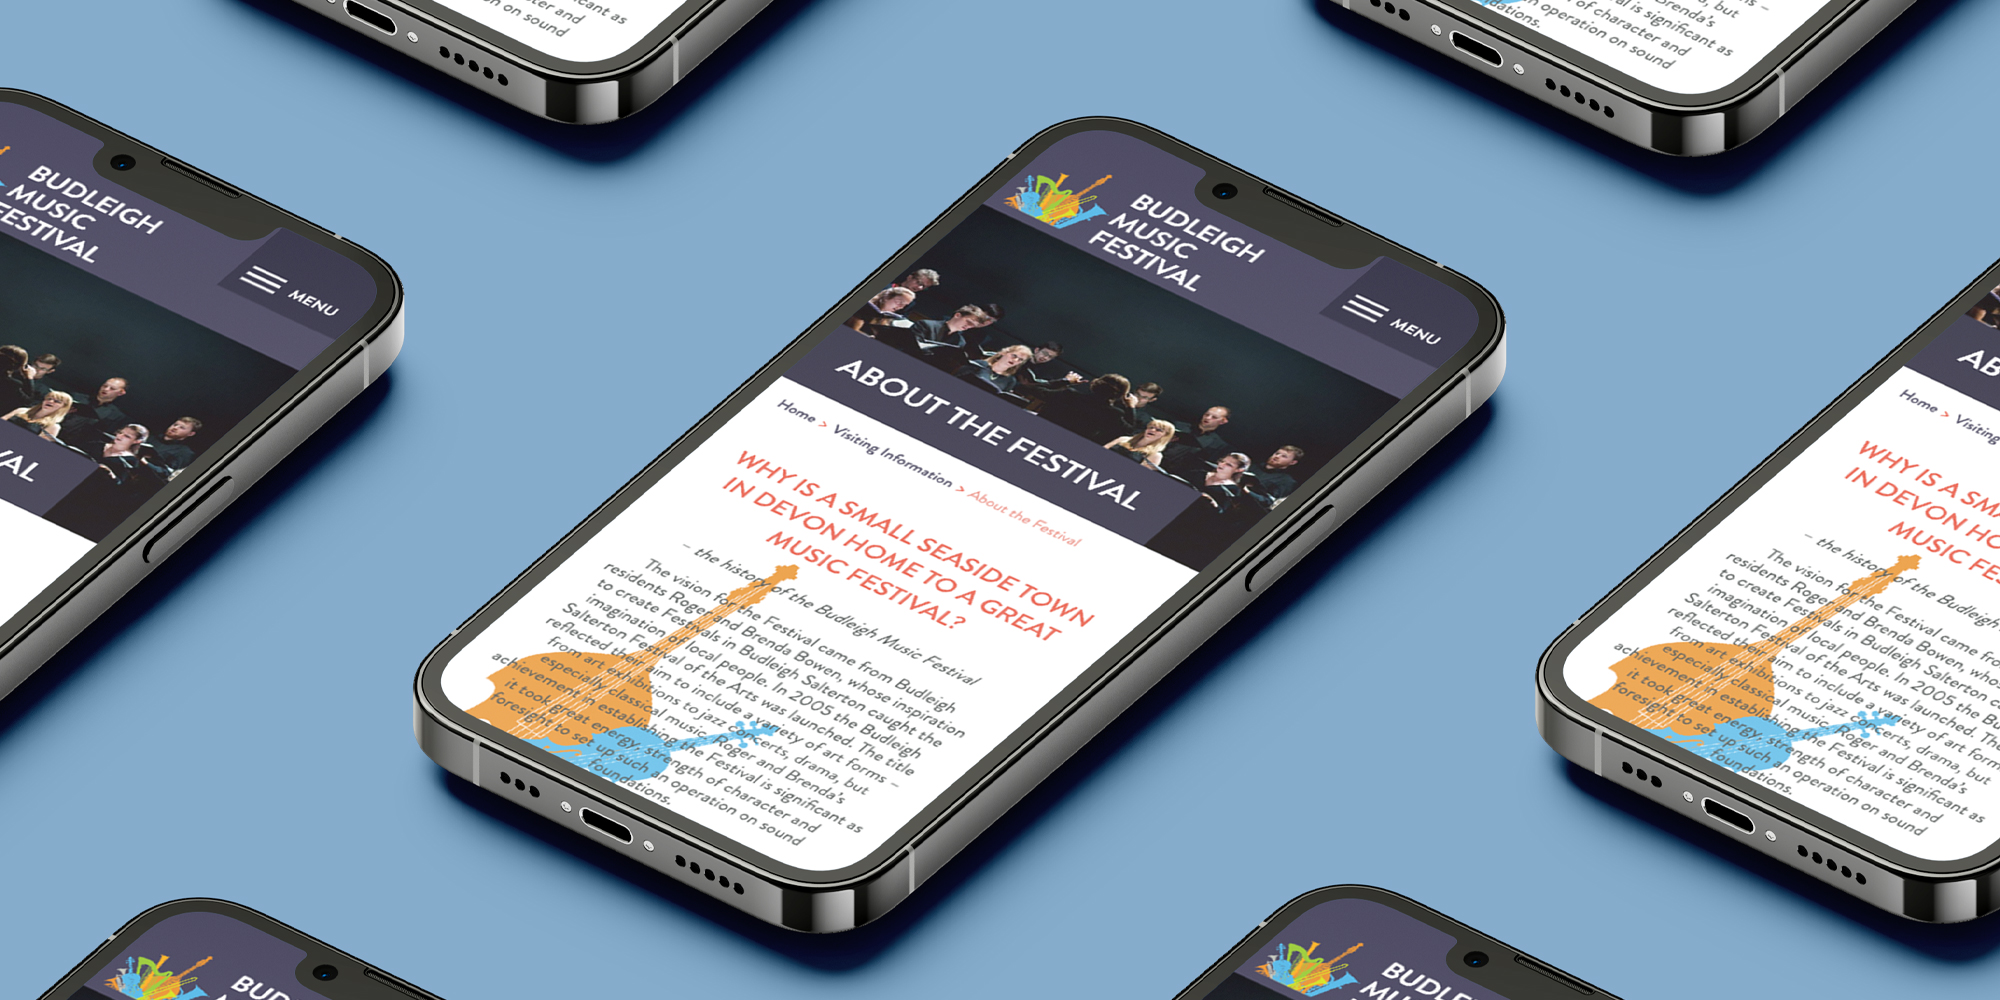 Budleigh Music Festival about page shown on a phone screen